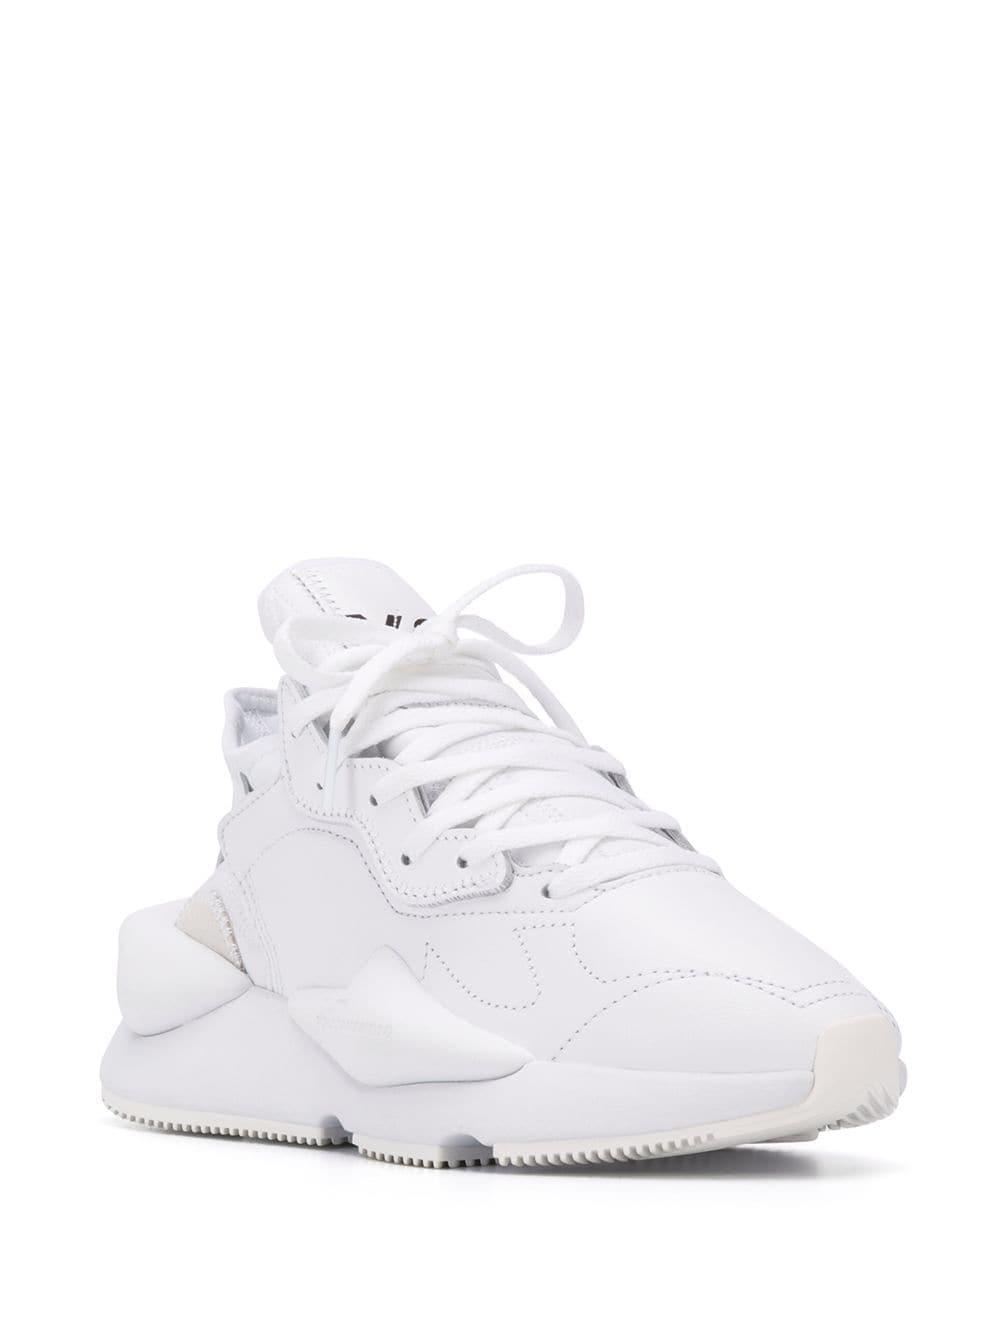 Y-3 Adidas Sneakers White | Lyst